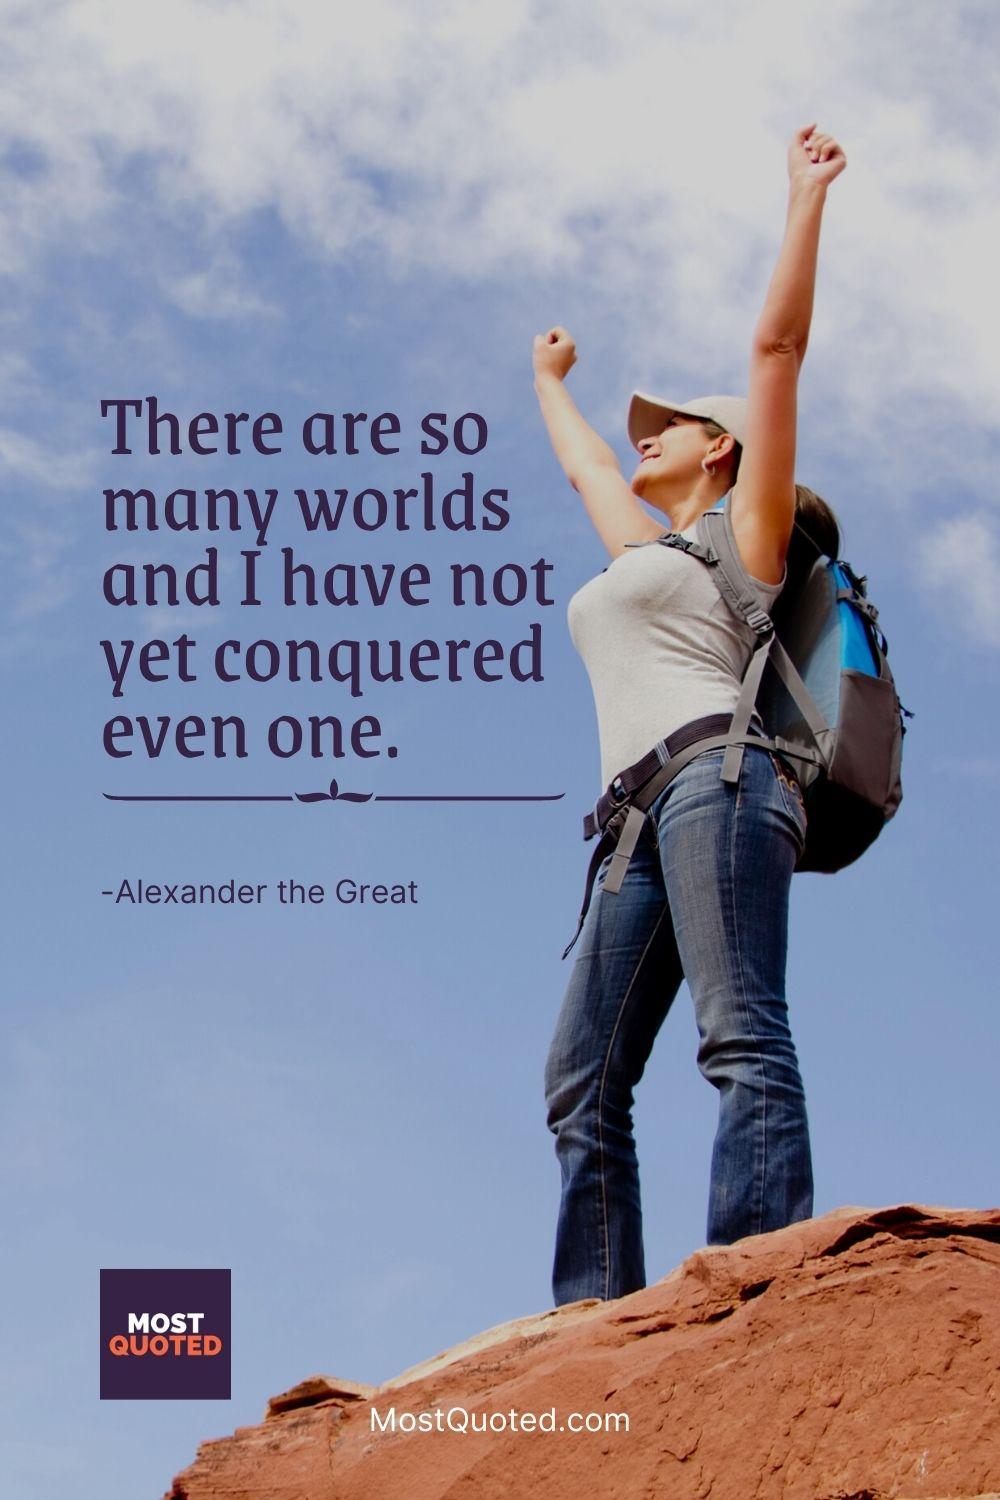 There are so many worlds and I have not yet conquered even one. - Alexander the Great